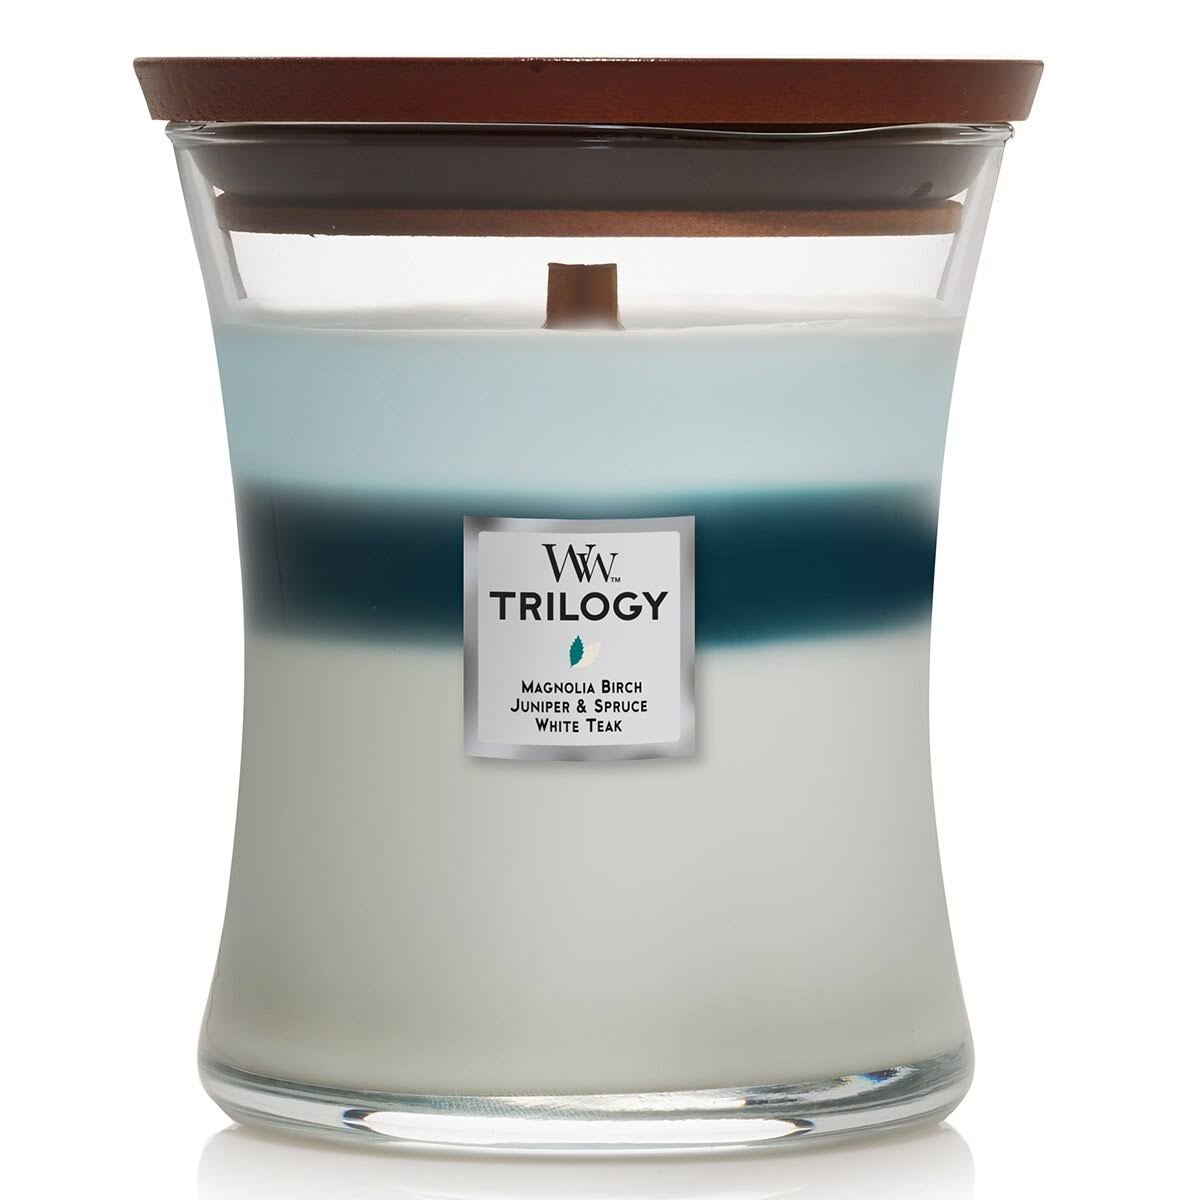 Ww Trilogy Candle, Icy Woodland - 1 candle, 9.7 oz